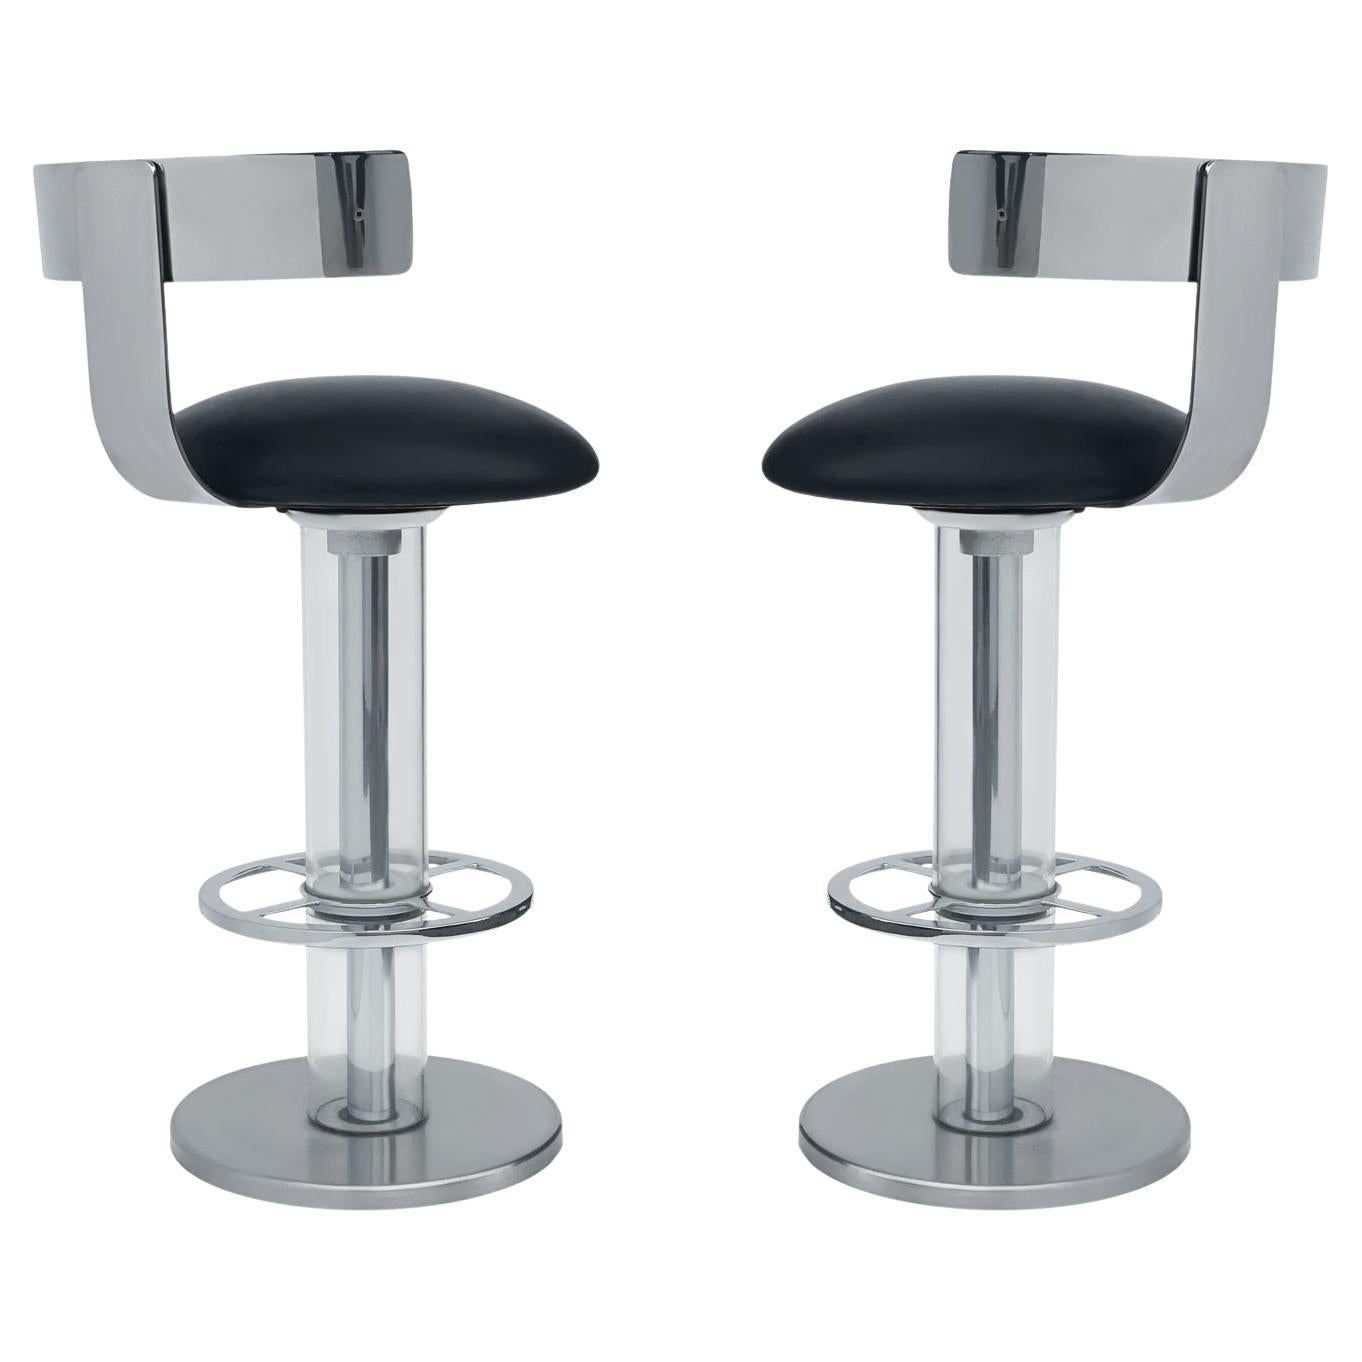 Pair of Mid-Century Modern Bar Stools in Chrome & Black by Design For Leisure